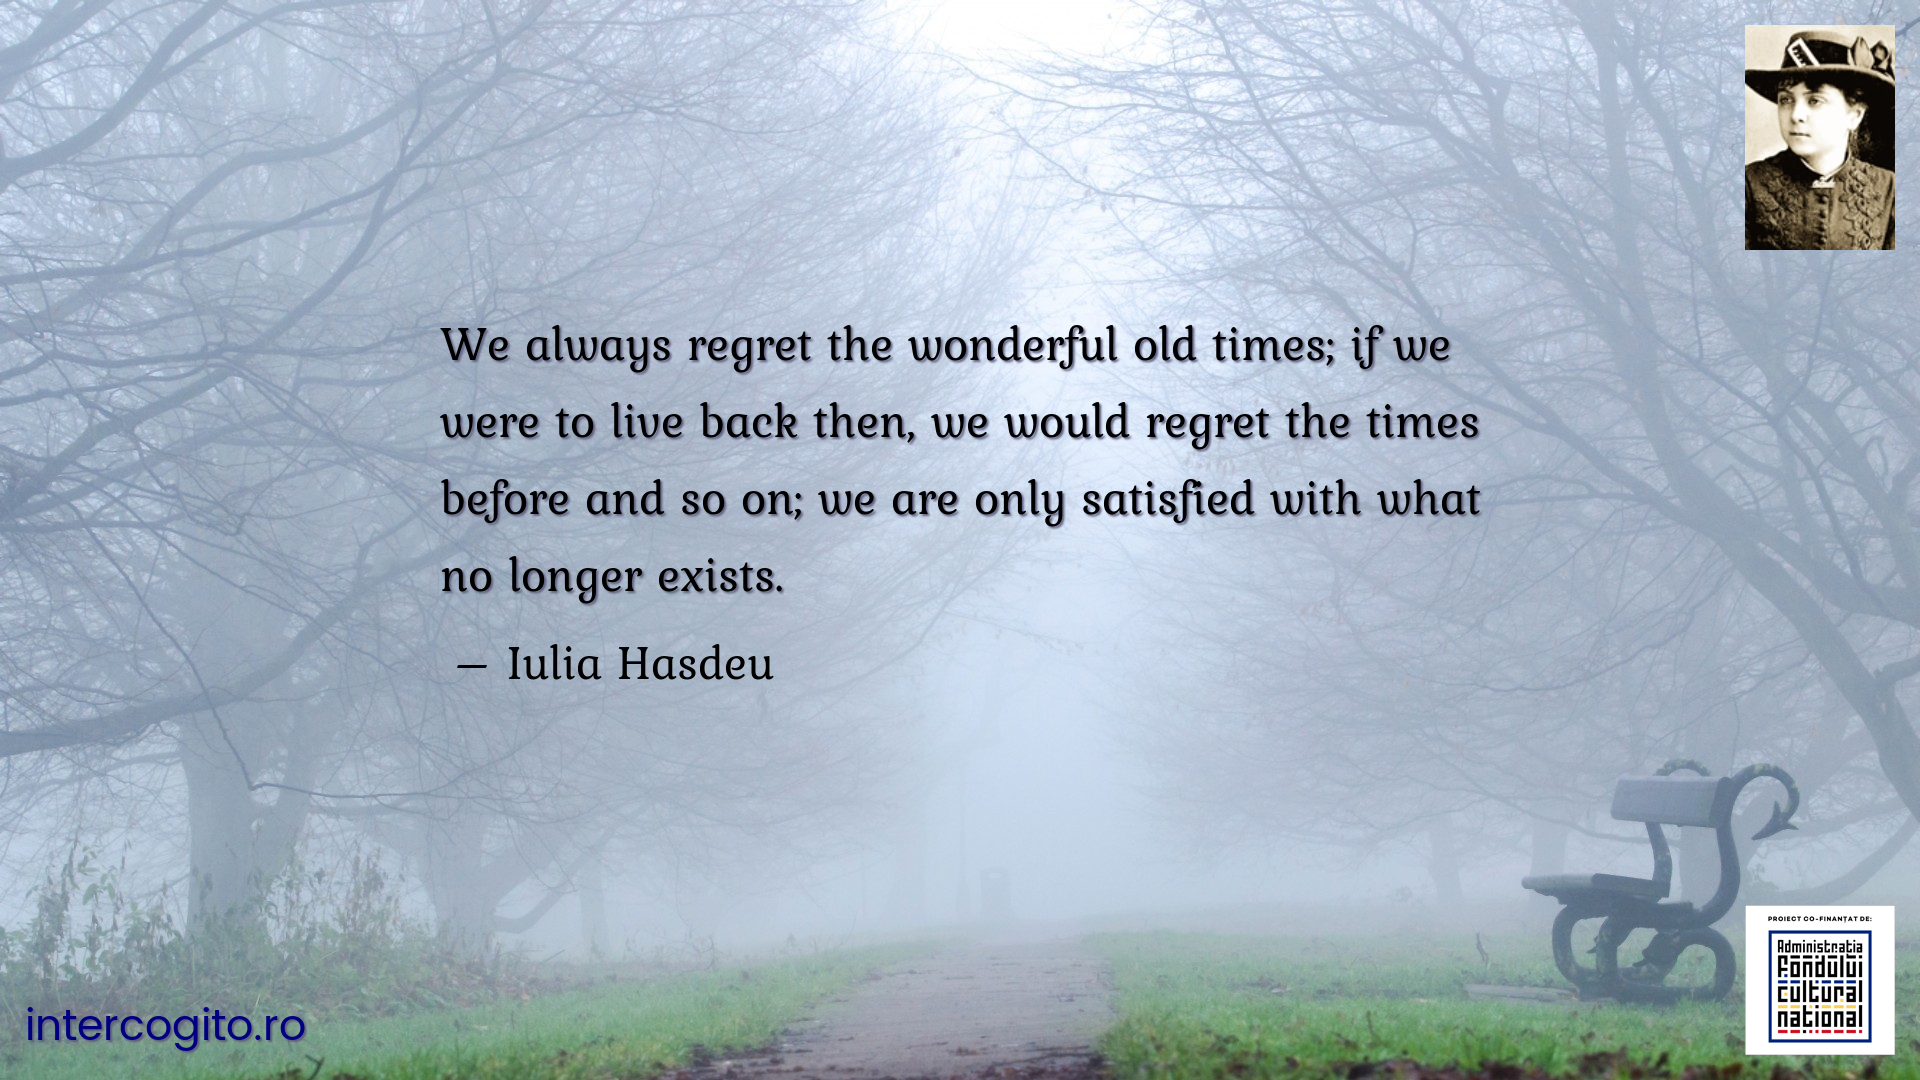 We always regret the wonderful old times; if we were to live back then, we would regret the times before and so on; we are only satisfied with what no longer exists.